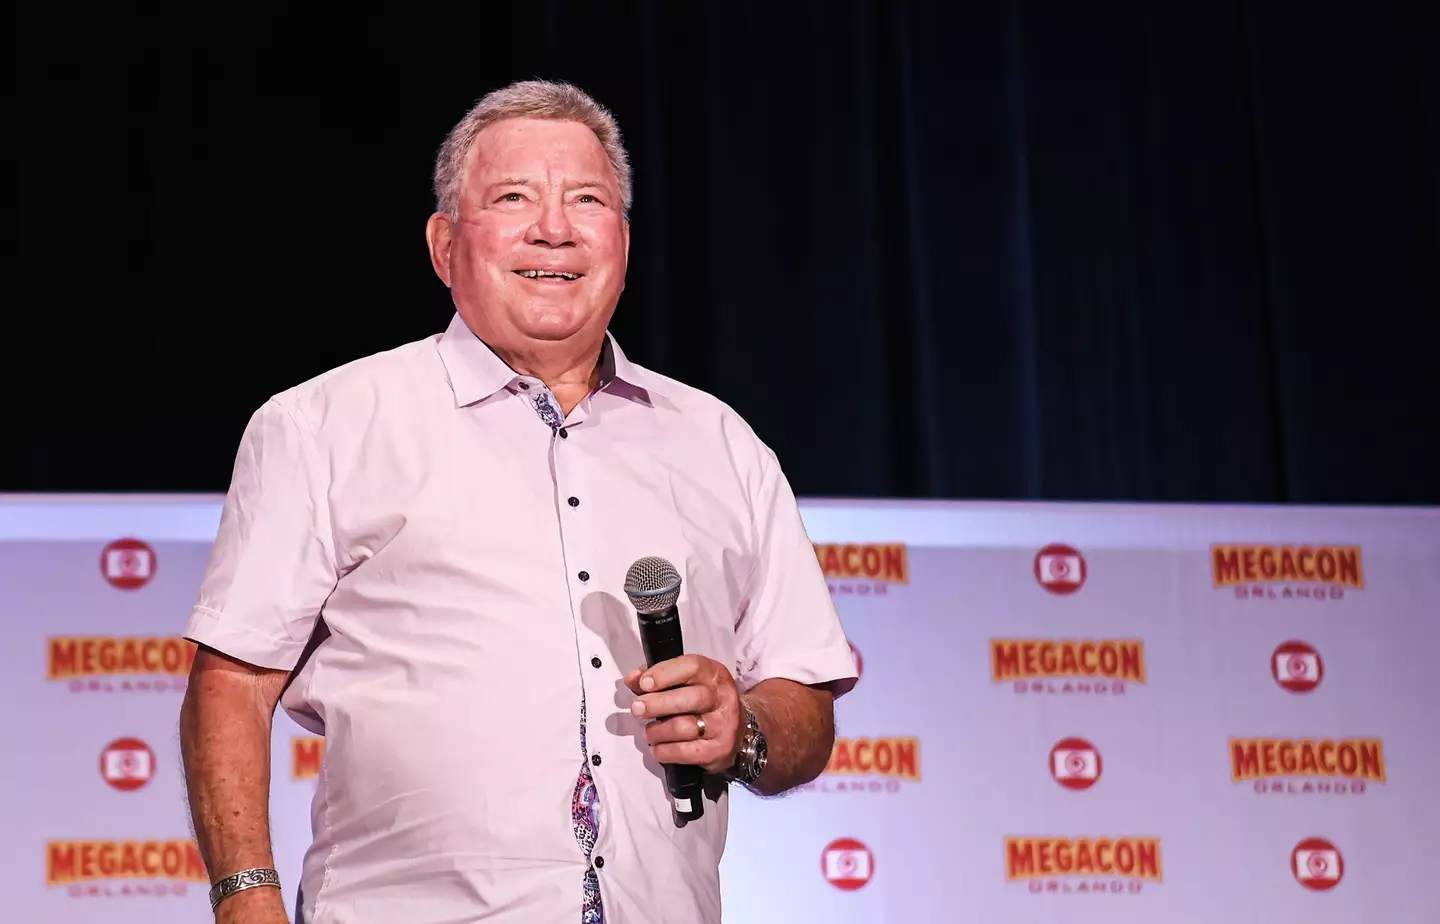 William Shatner has hit out at former Star Trek co-star George Takei.